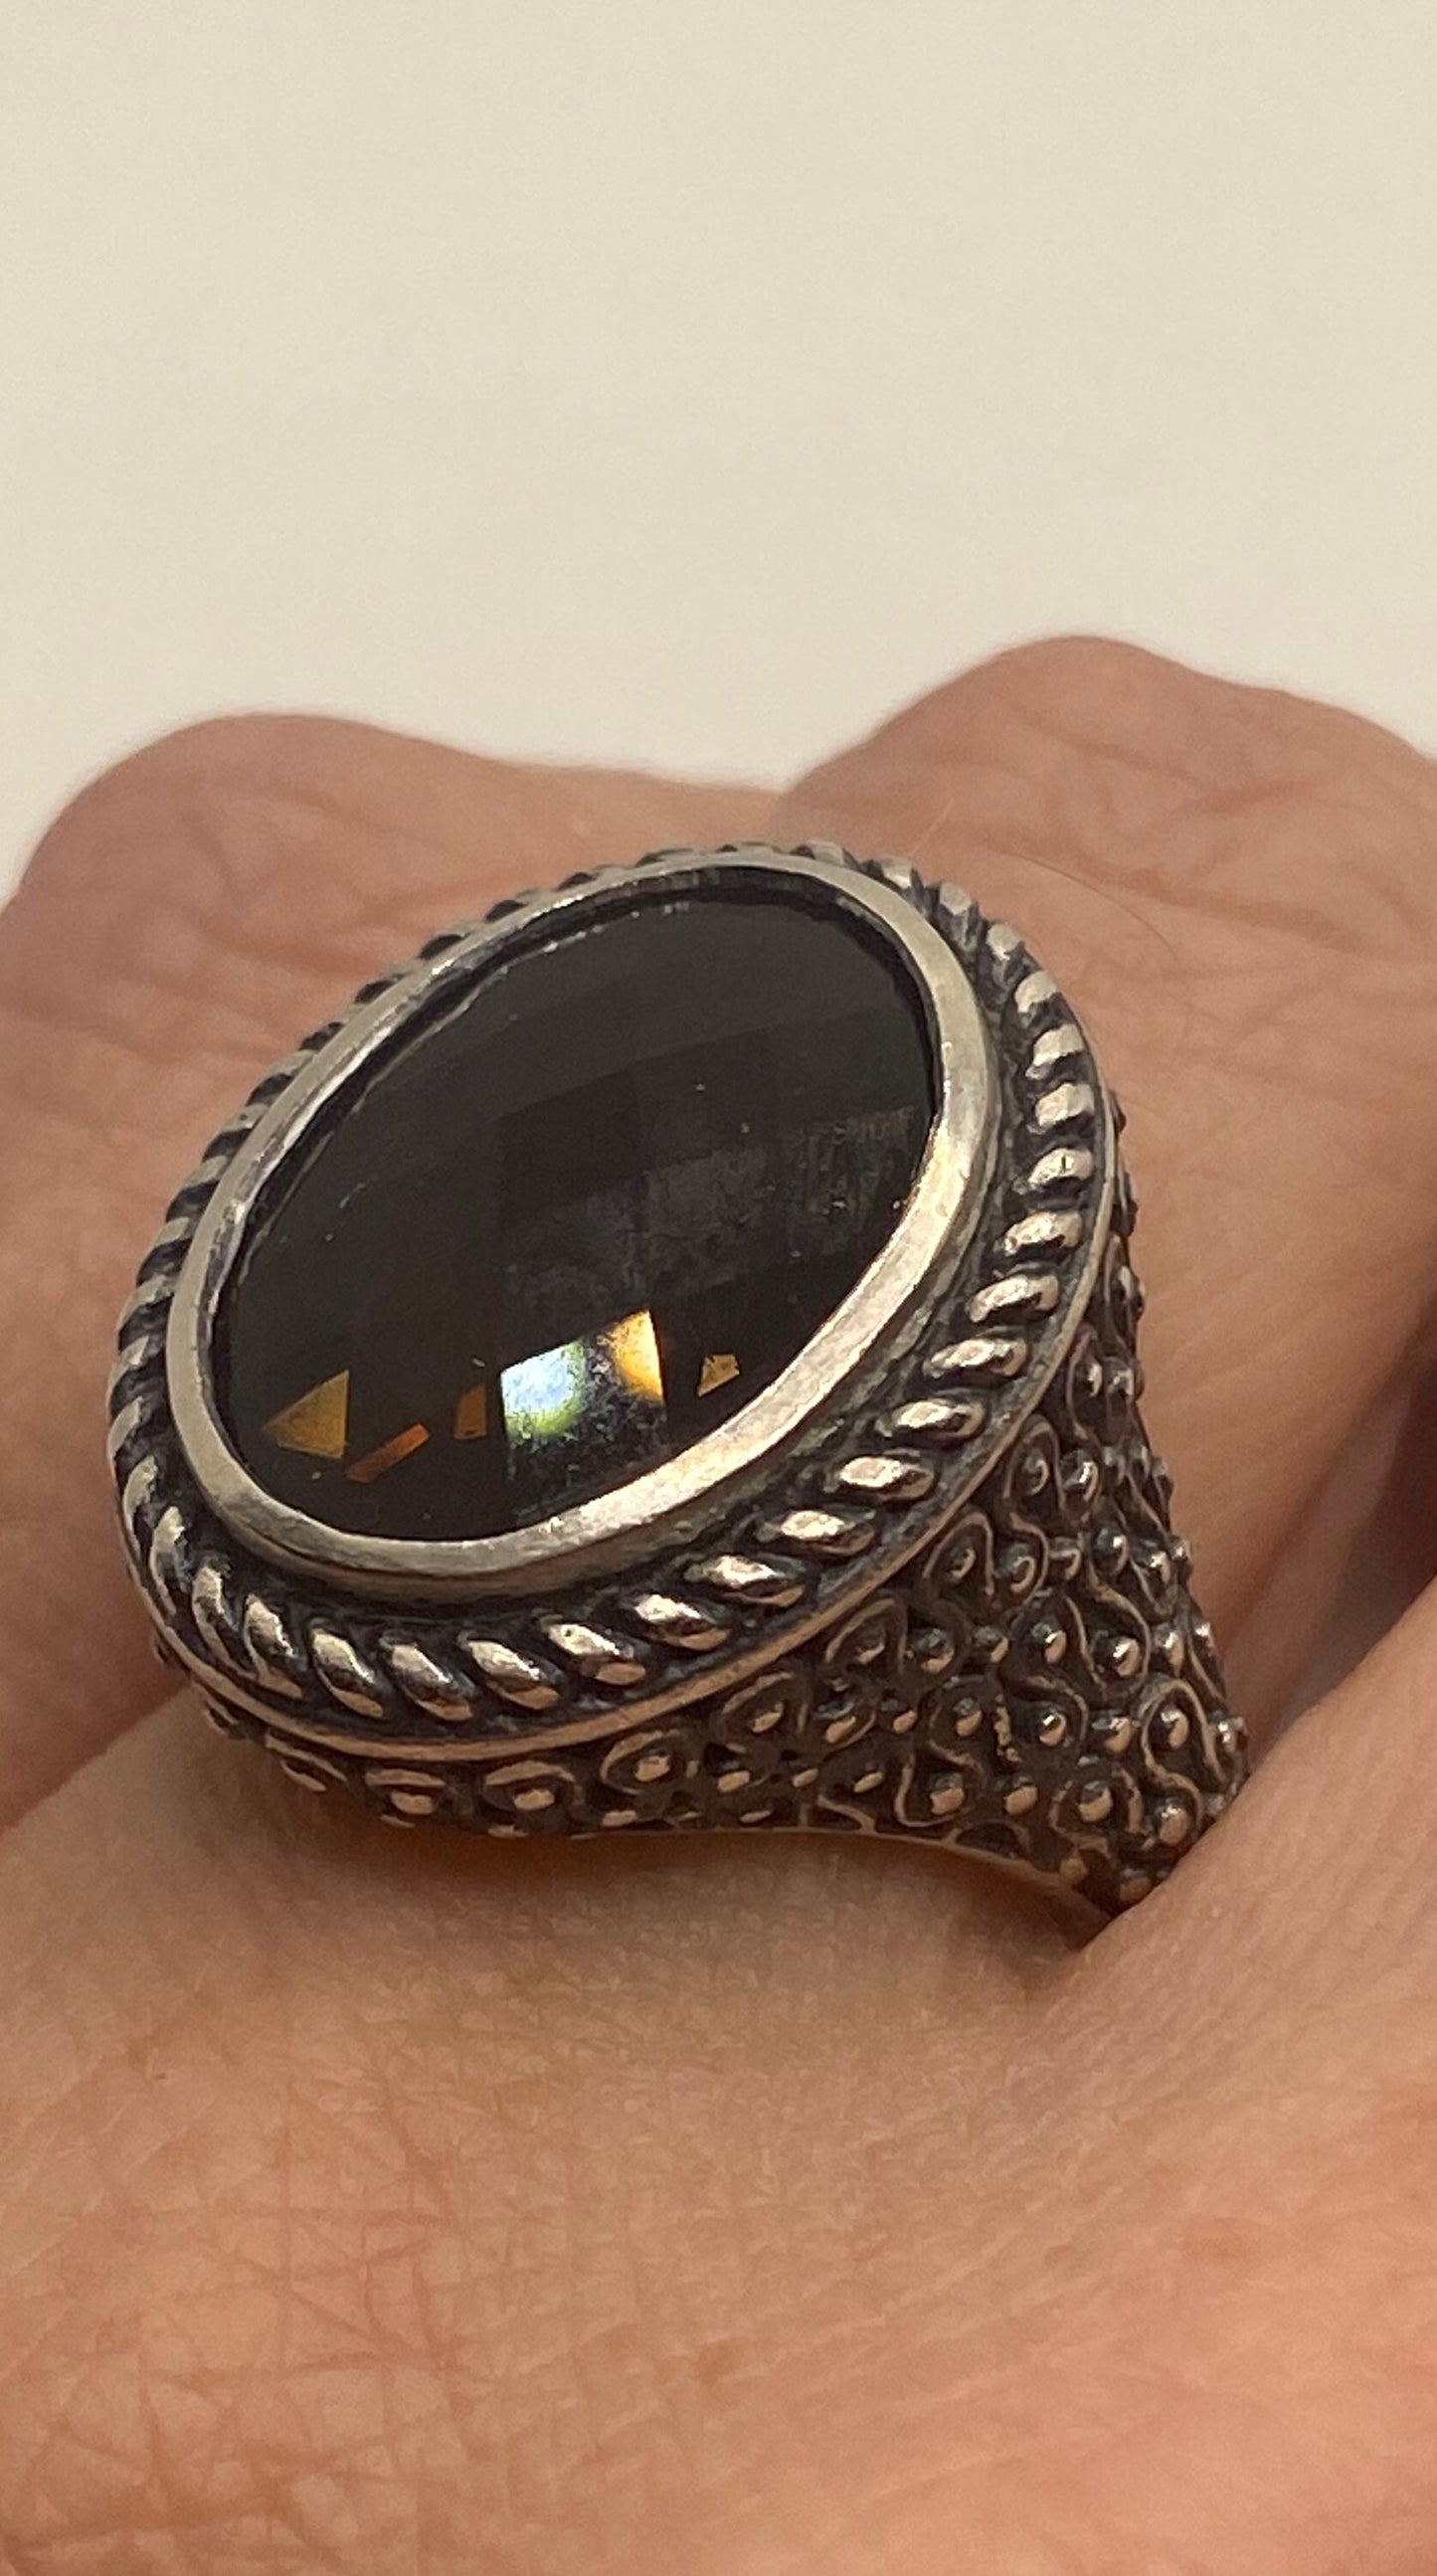 Vintage Smoky Topaz Setting 925 Sterling Silver Gothic Ring Size 4